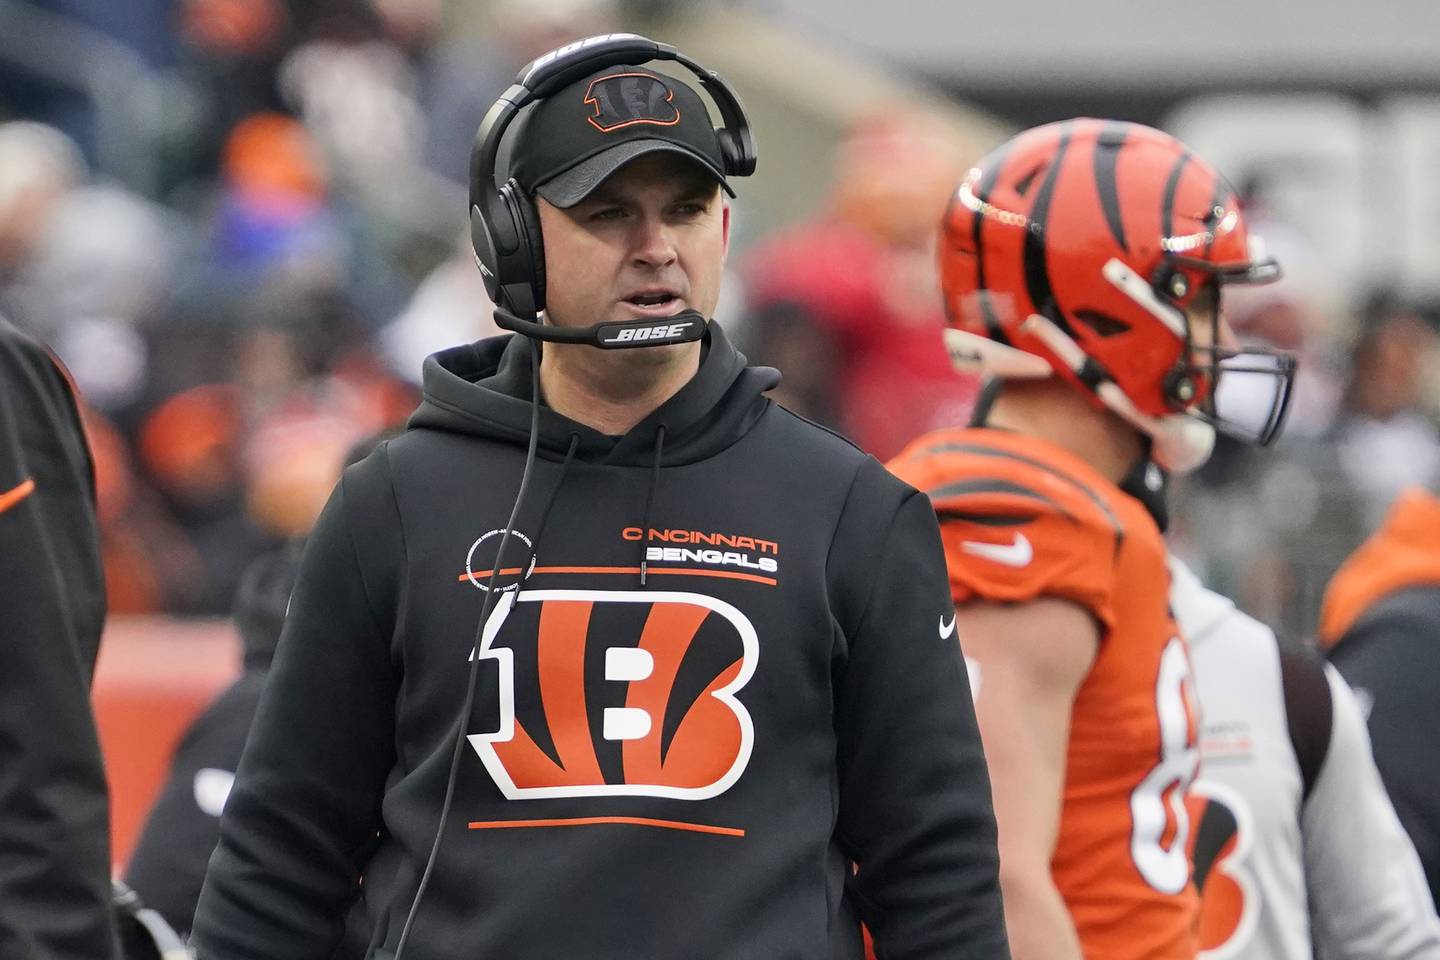 Head coach Zac Taylor aims to lead Cincinnati Bengals to their first Super Bowl victory. AP